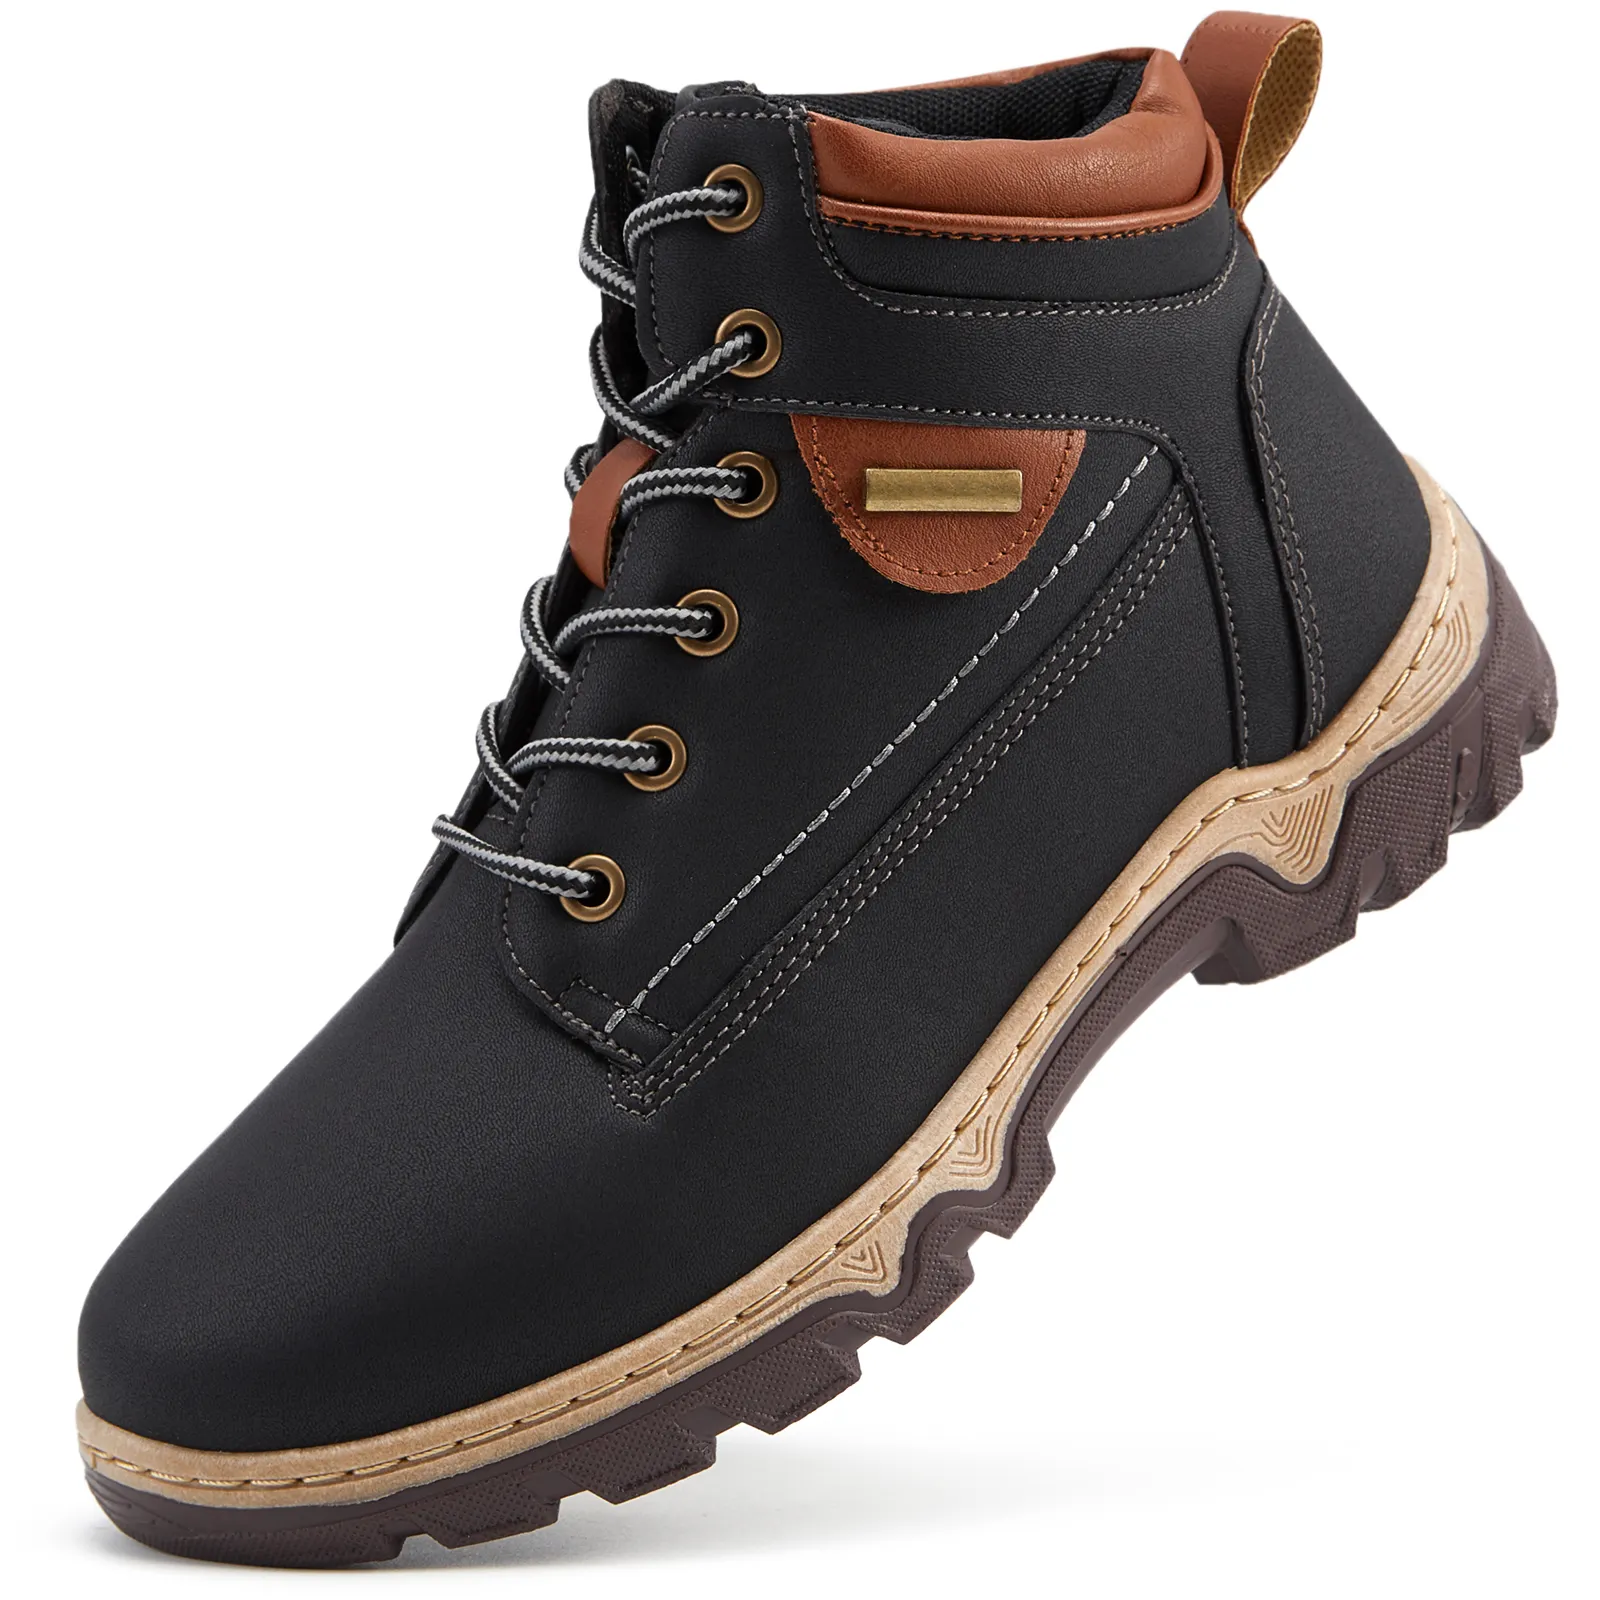 High Quality Customized Lace-Up Winter Waterproof Upper Hunting Boots Anti-Slip Sole Sports Outdoor Hiking Boots